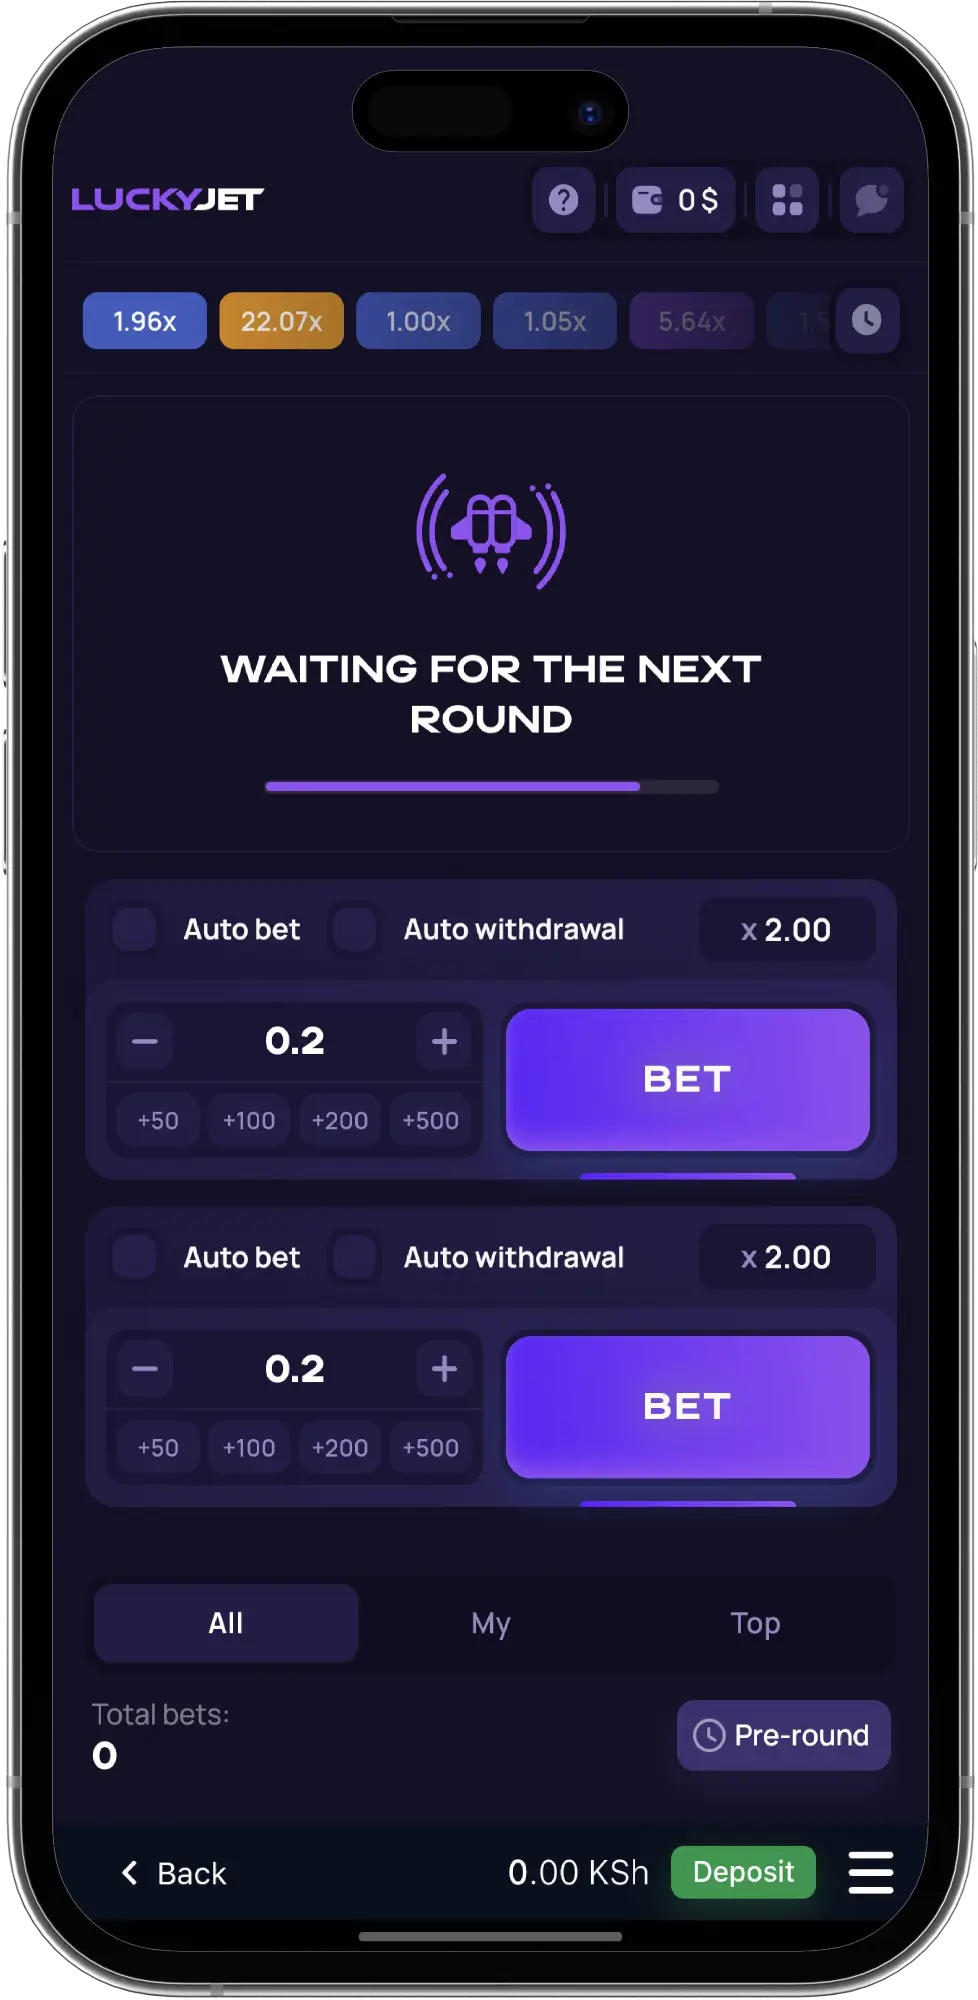 1win casino users in Kenya can place lucky jet bets pre-round